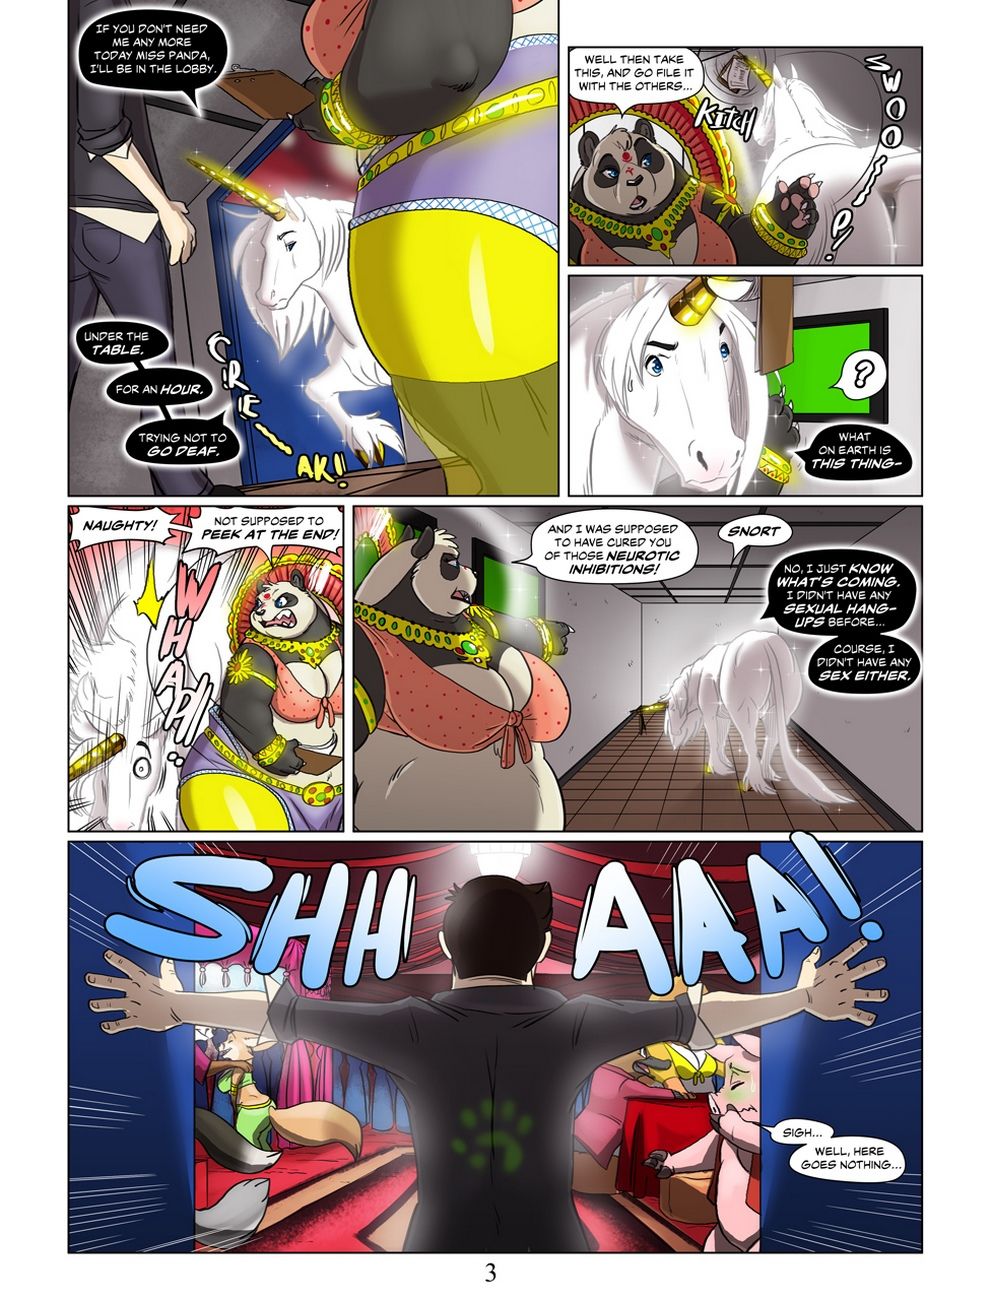 Panda Appointment 6 page 4